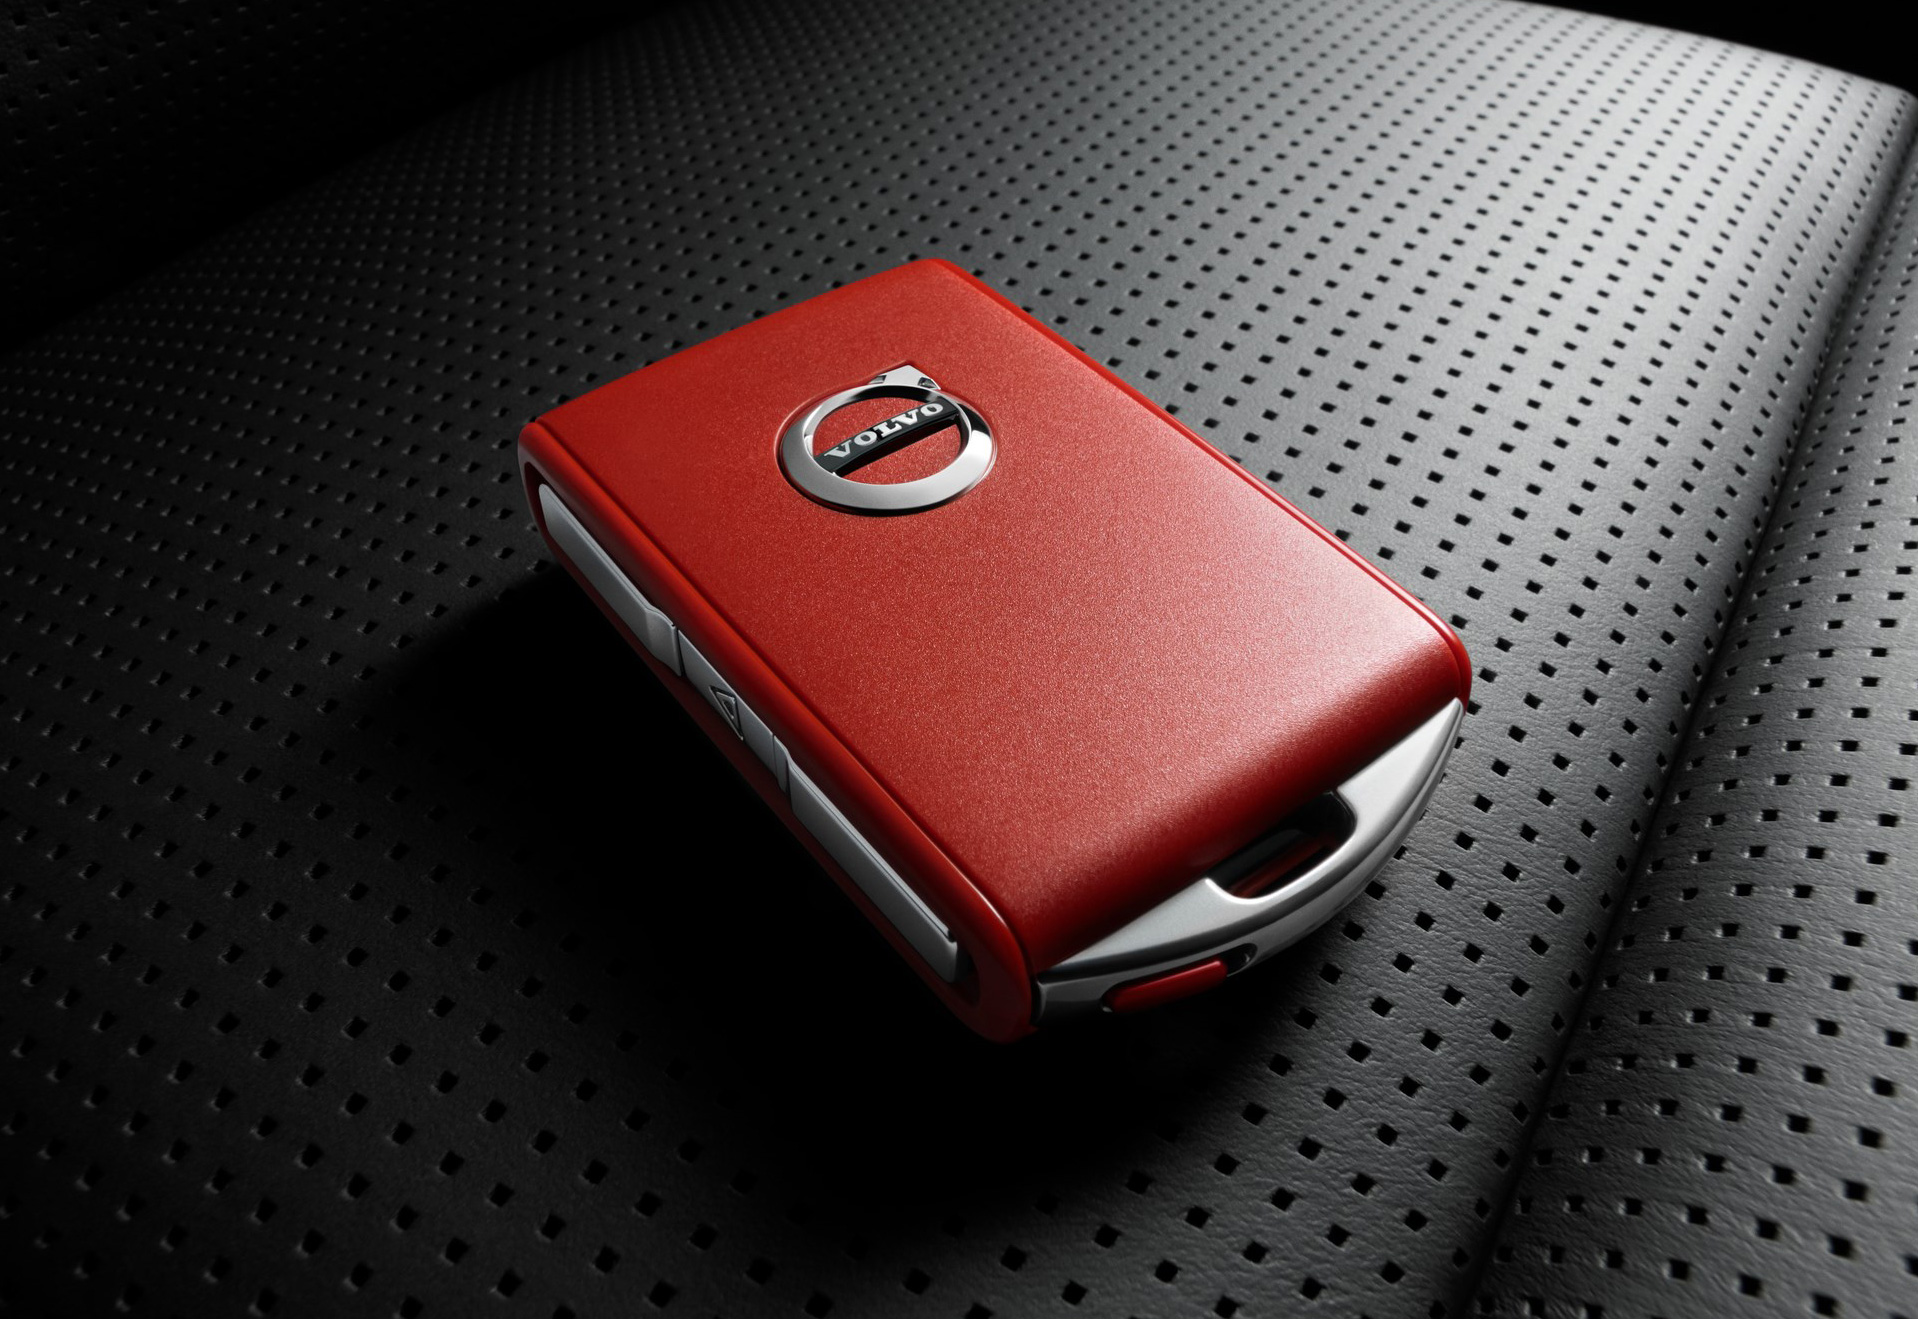 201883_Volvo_Cars_new_Red_Key_means_your_car_is_always_in_safe_hands.jpg